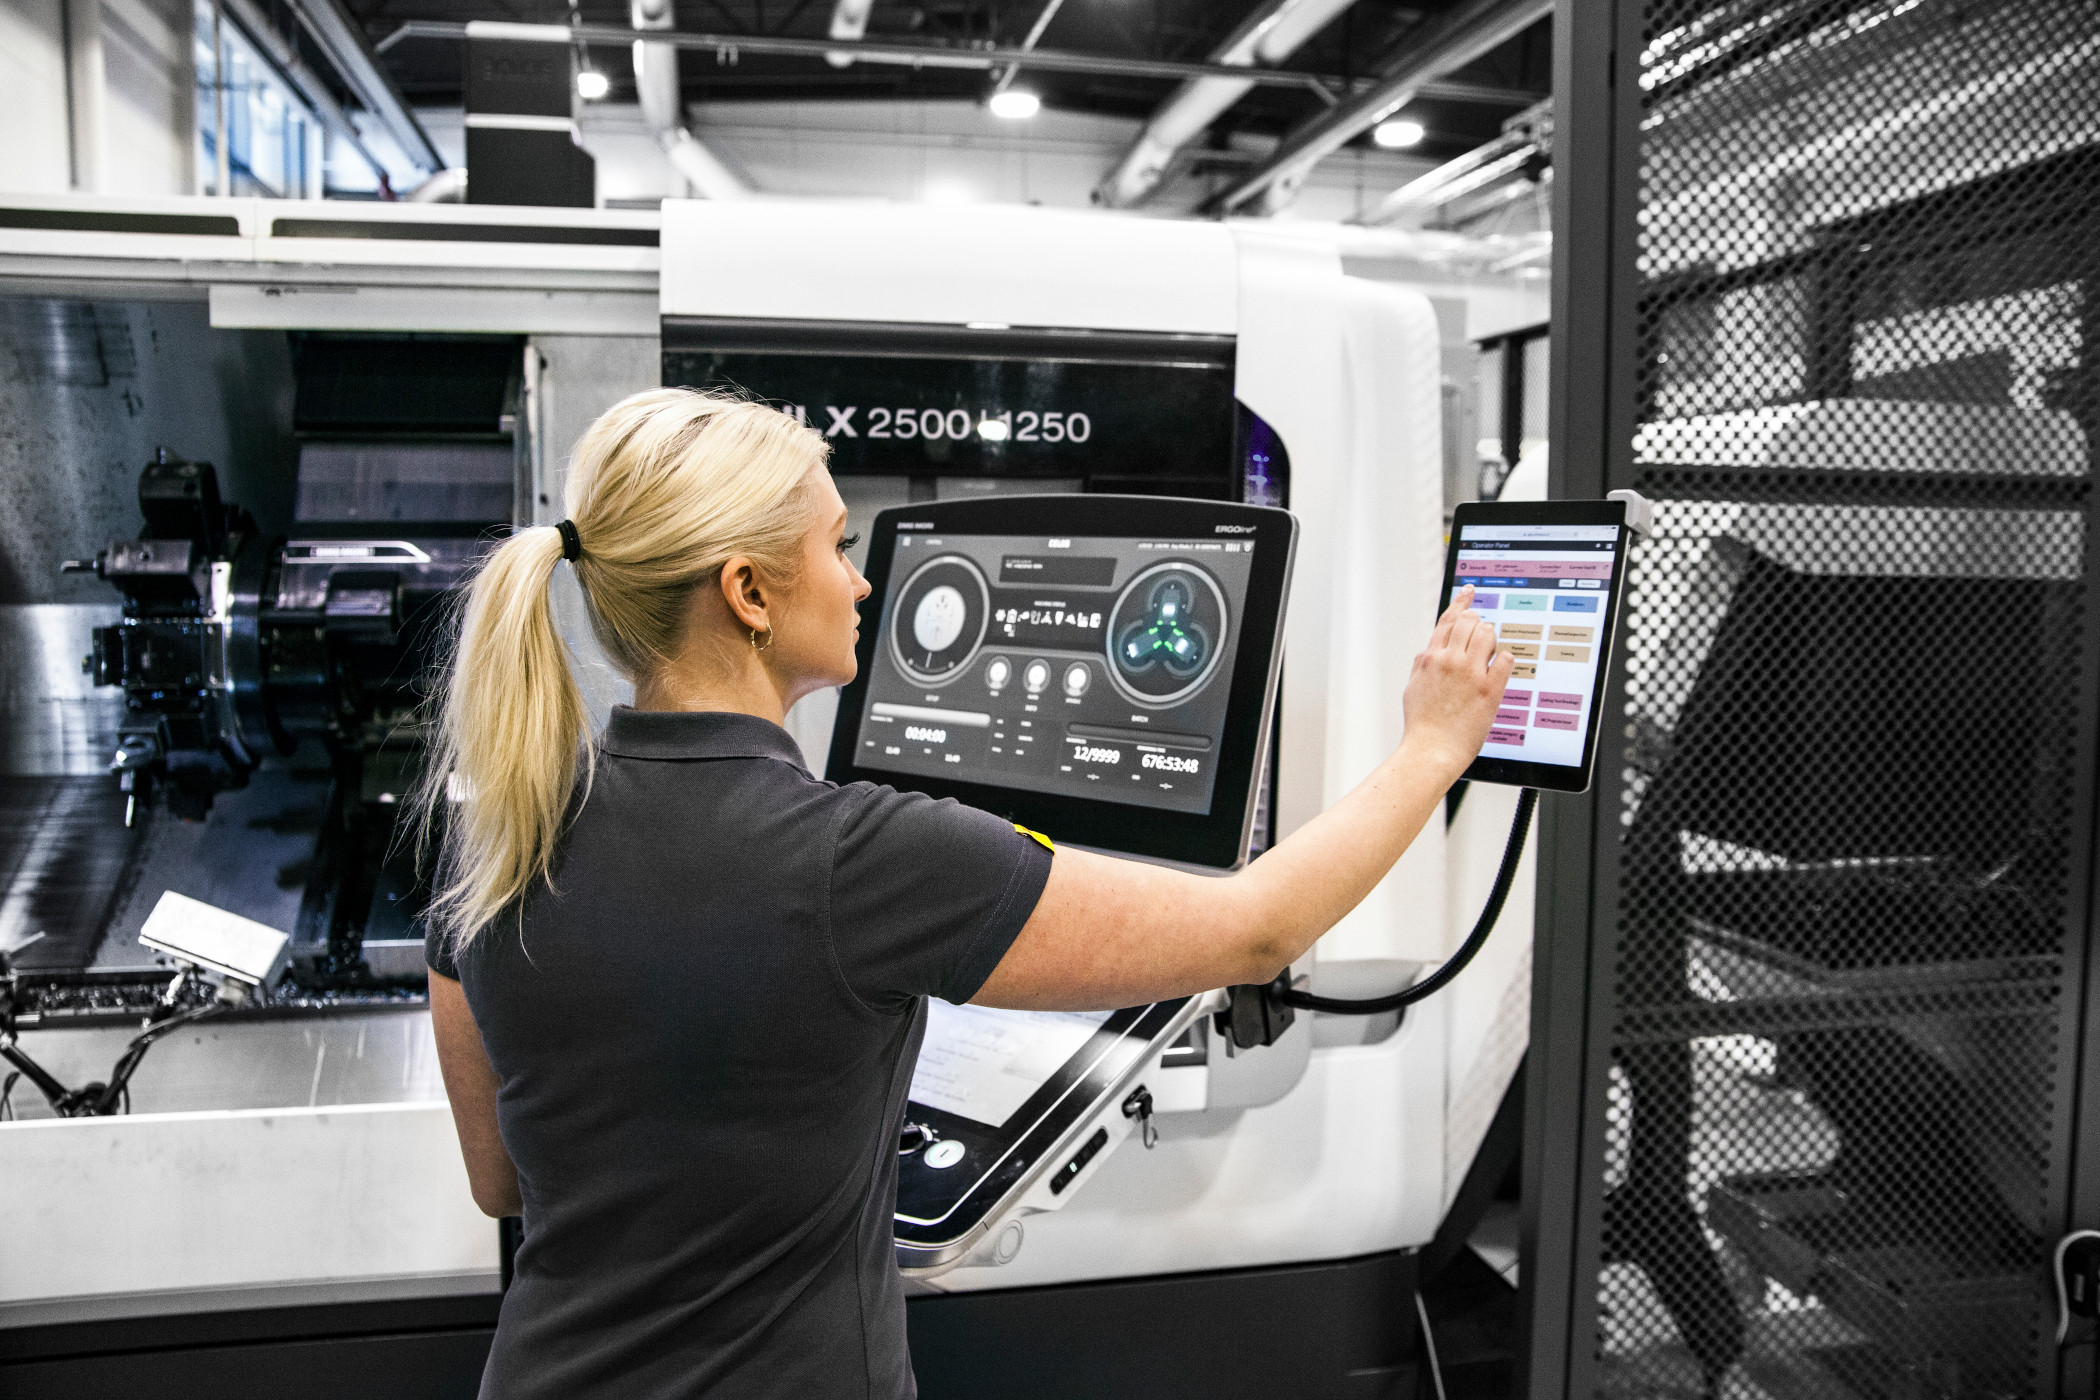 With Sandvik Coromant’s Machining Insights, CNC machines can transmit information in higher volumes through an Ethernet connection.